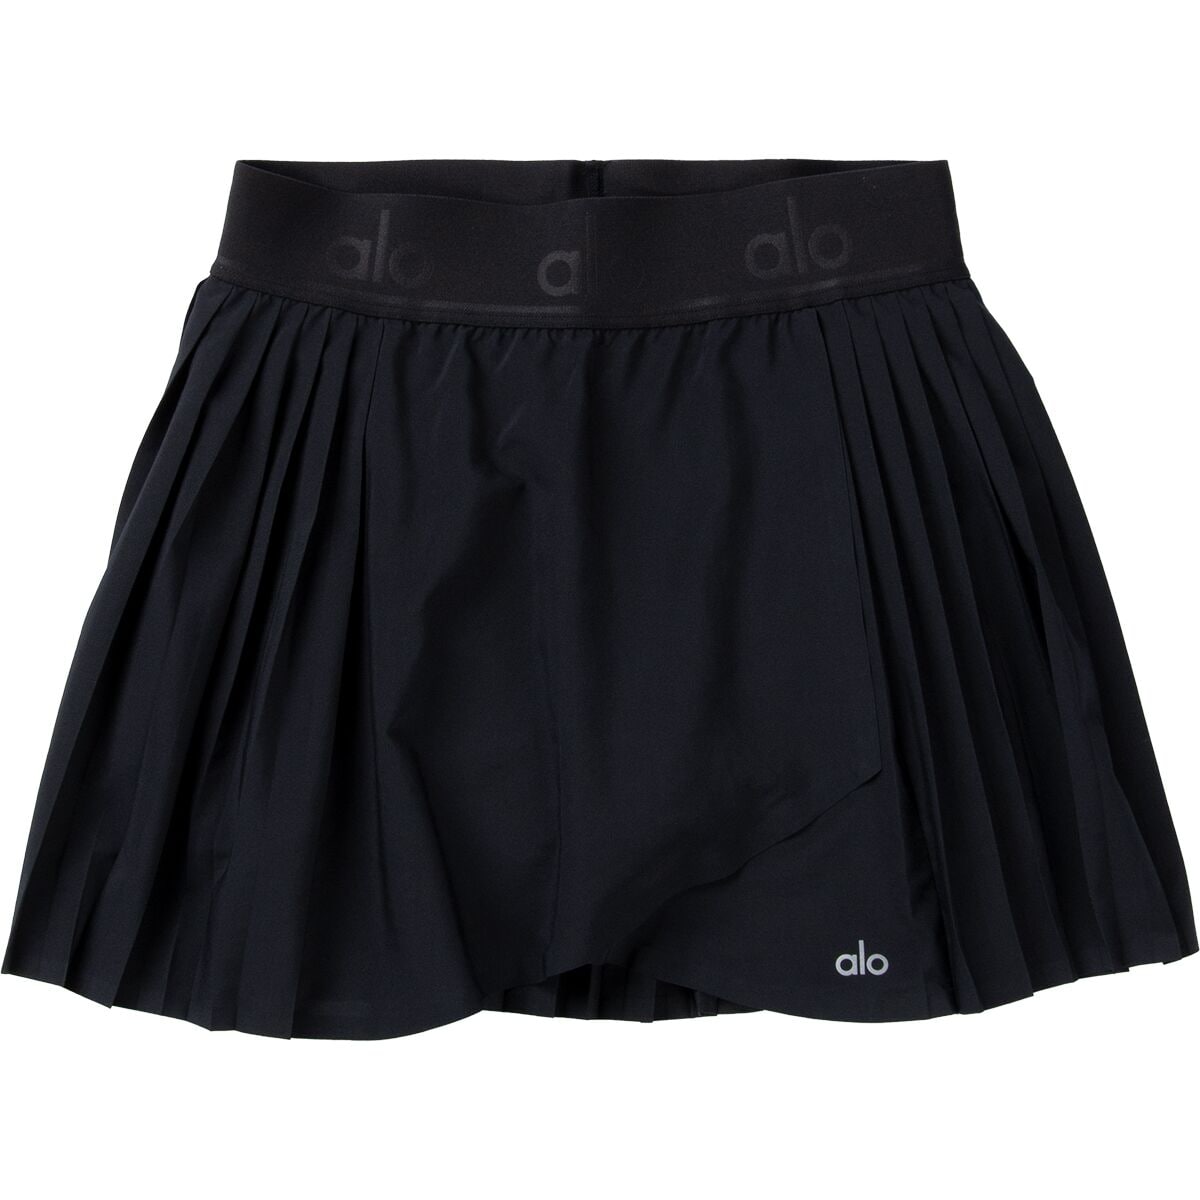 Aces tennis skirt in red - Alo Yoga